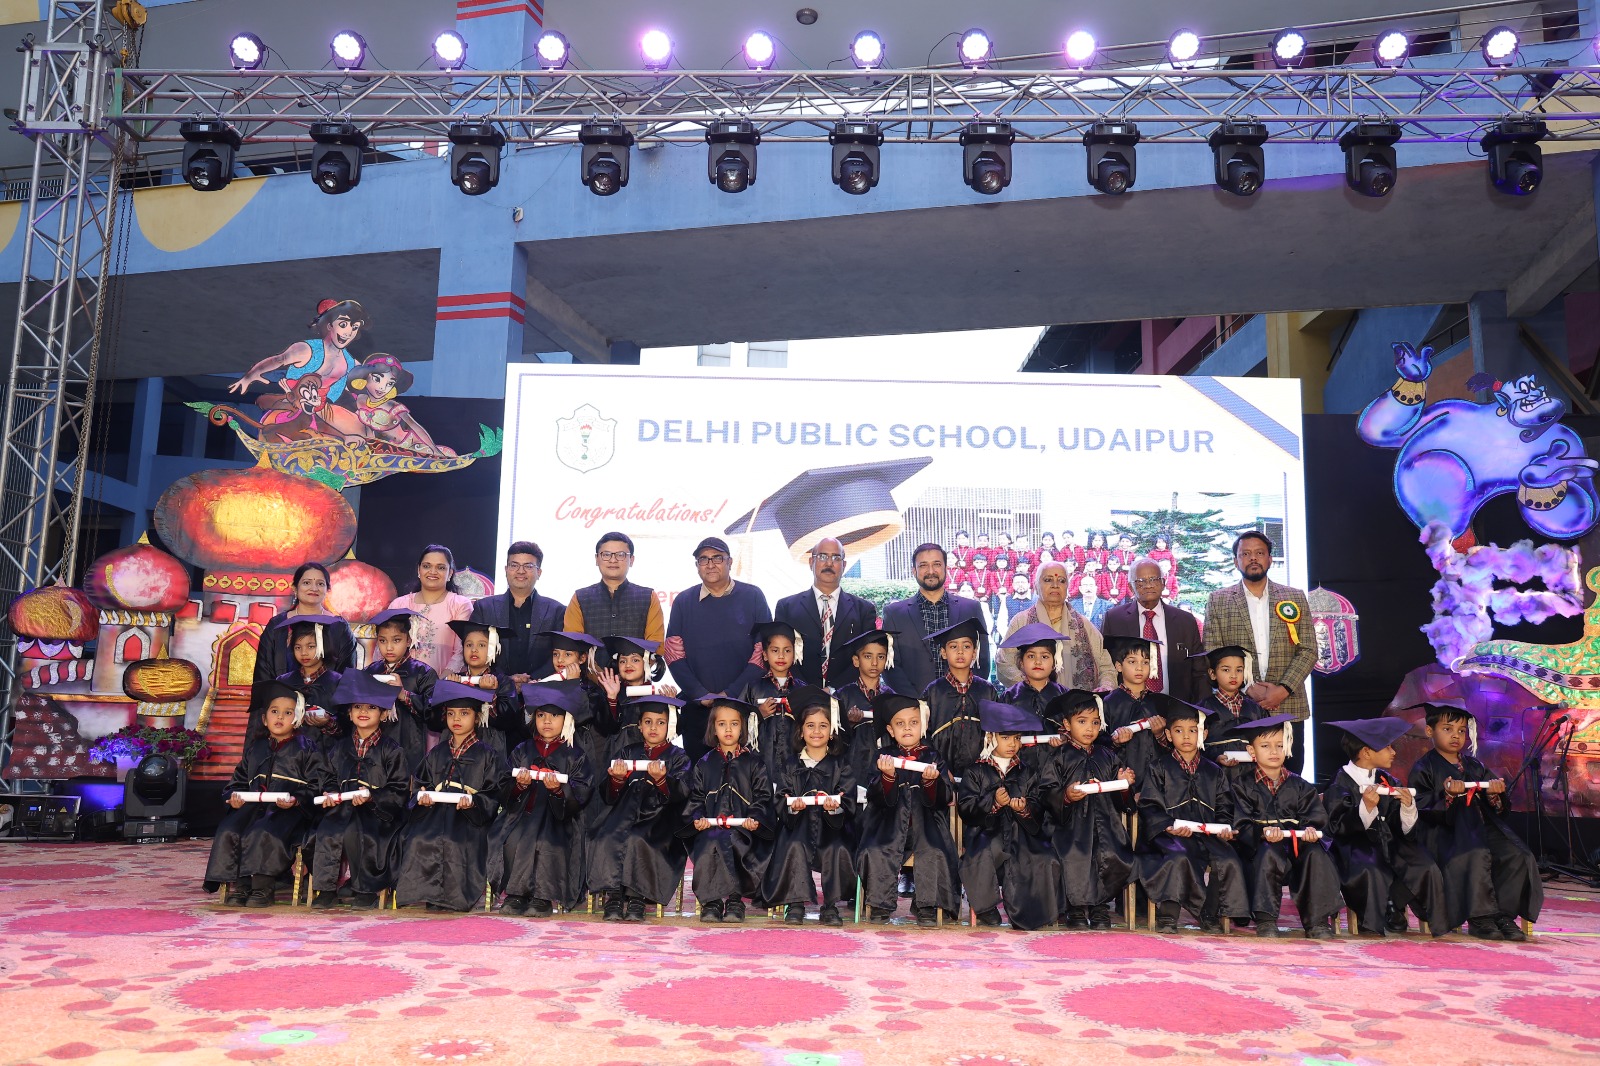 DPS Udaipur Successfully Concludes Graduation Day Celebrations"